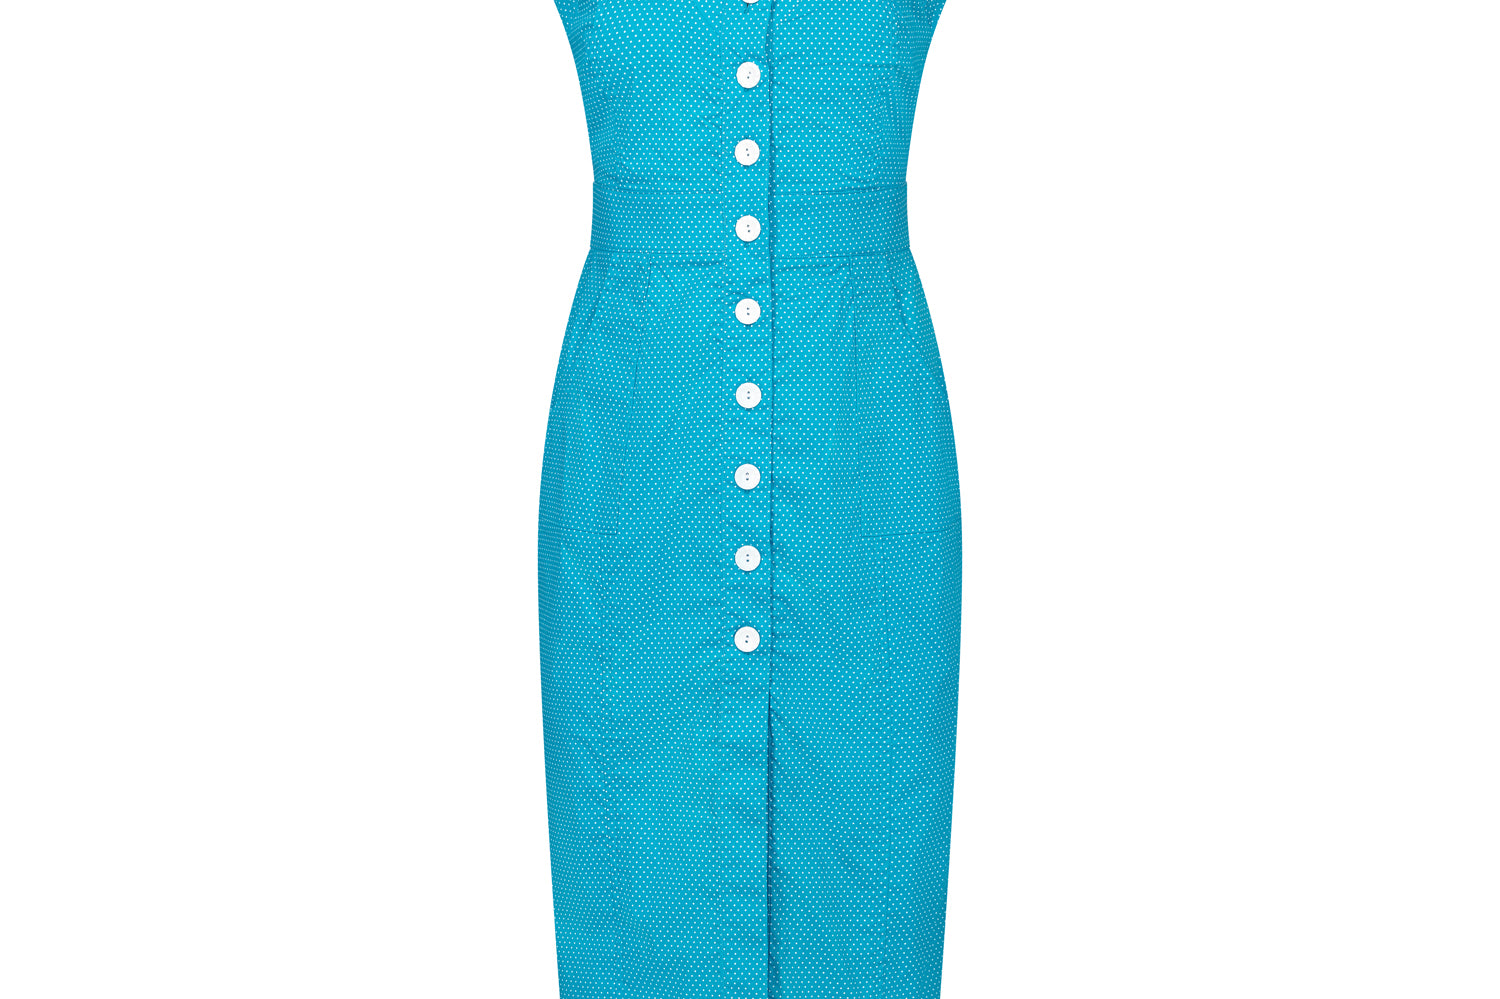 Queenie Quintessential Sweetheart High Waisted Dress in Teal Pin Spot